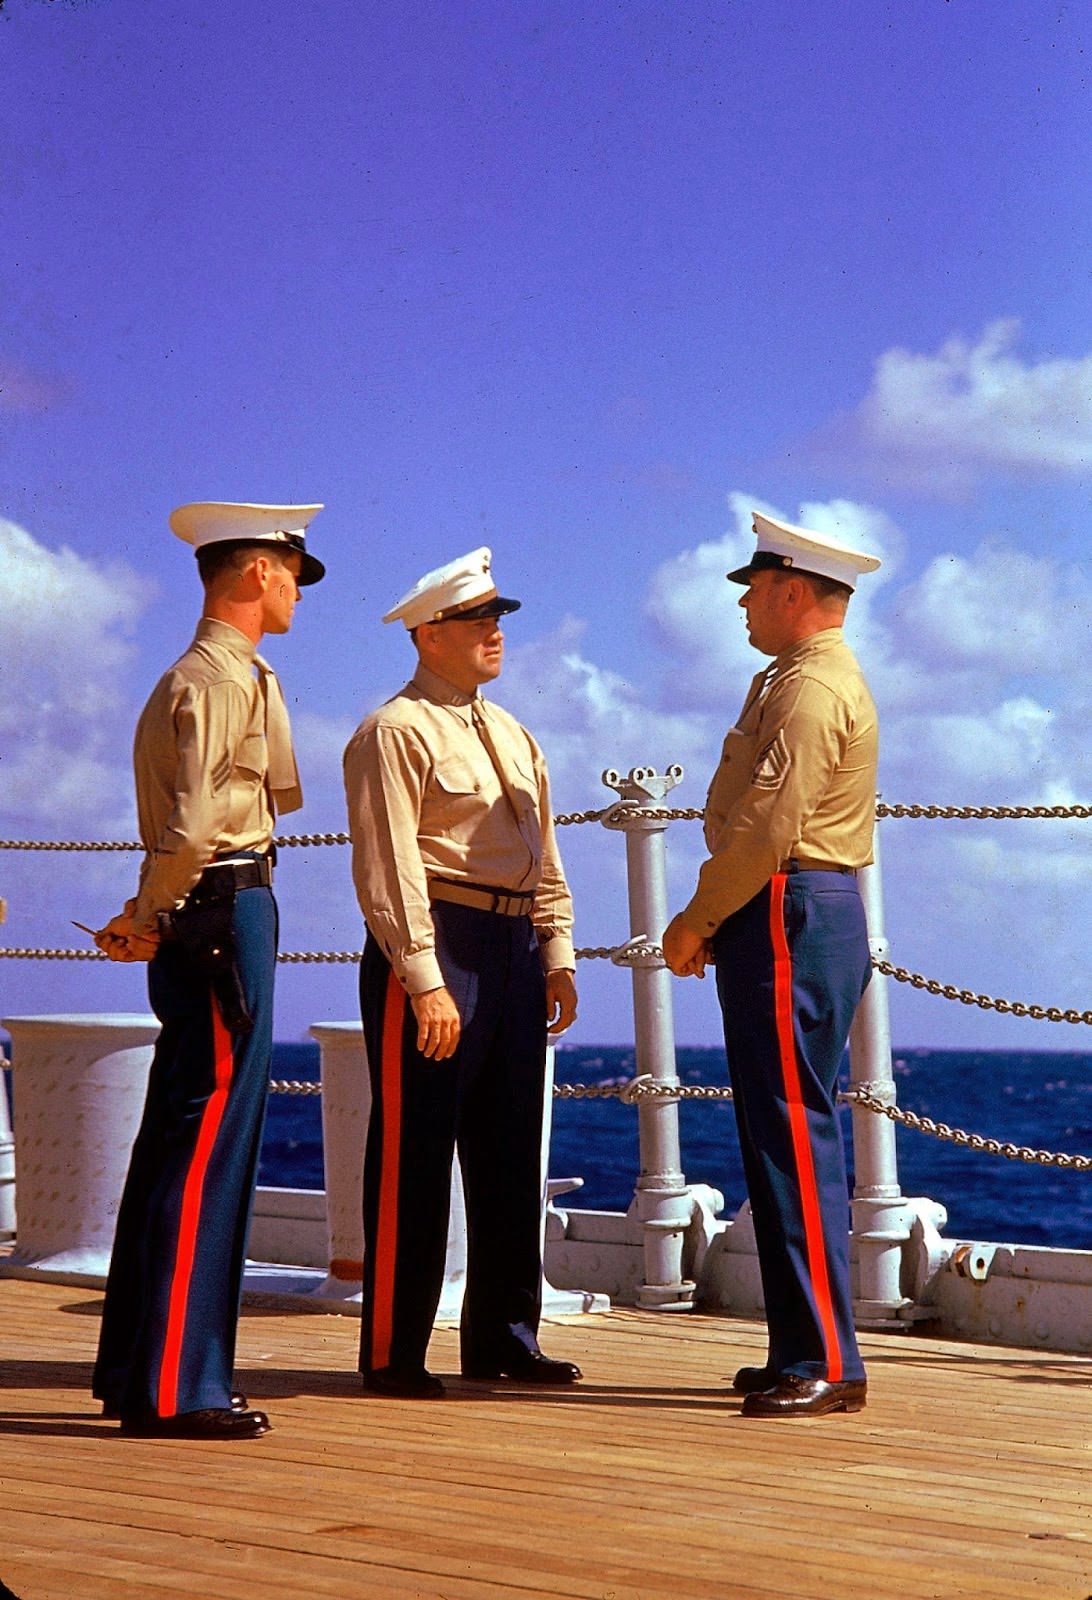 Three American Marines in dress uniforms talk aboard an unidentified ship during the US Navy's Pacific fleet maneuvers near Hawaii, September 1940.